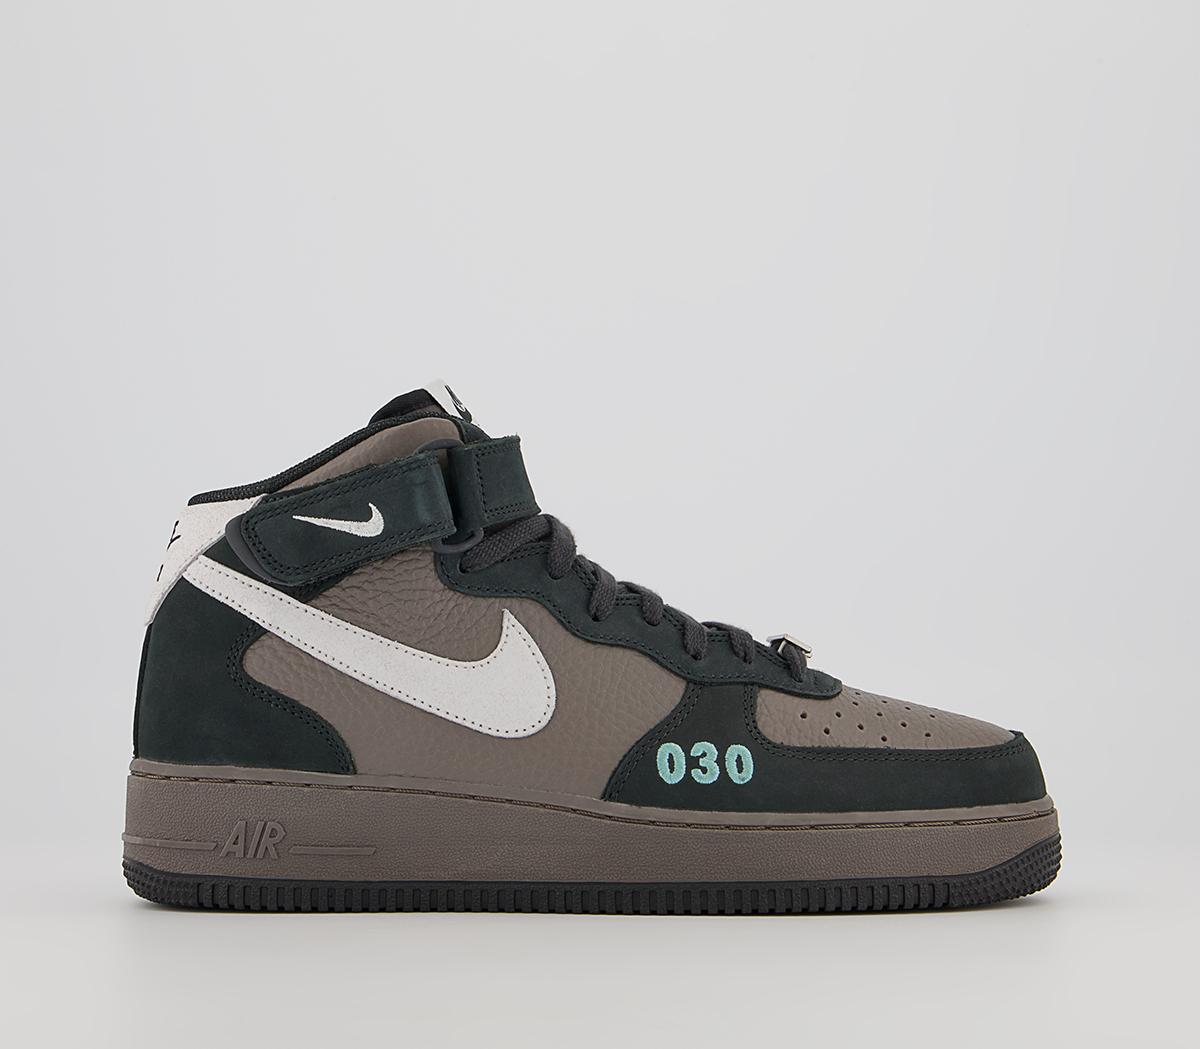 NikeNike Air Force 1 Mid Berlin TrainersCave Stone White Off Noir Washed Teal Black Metall